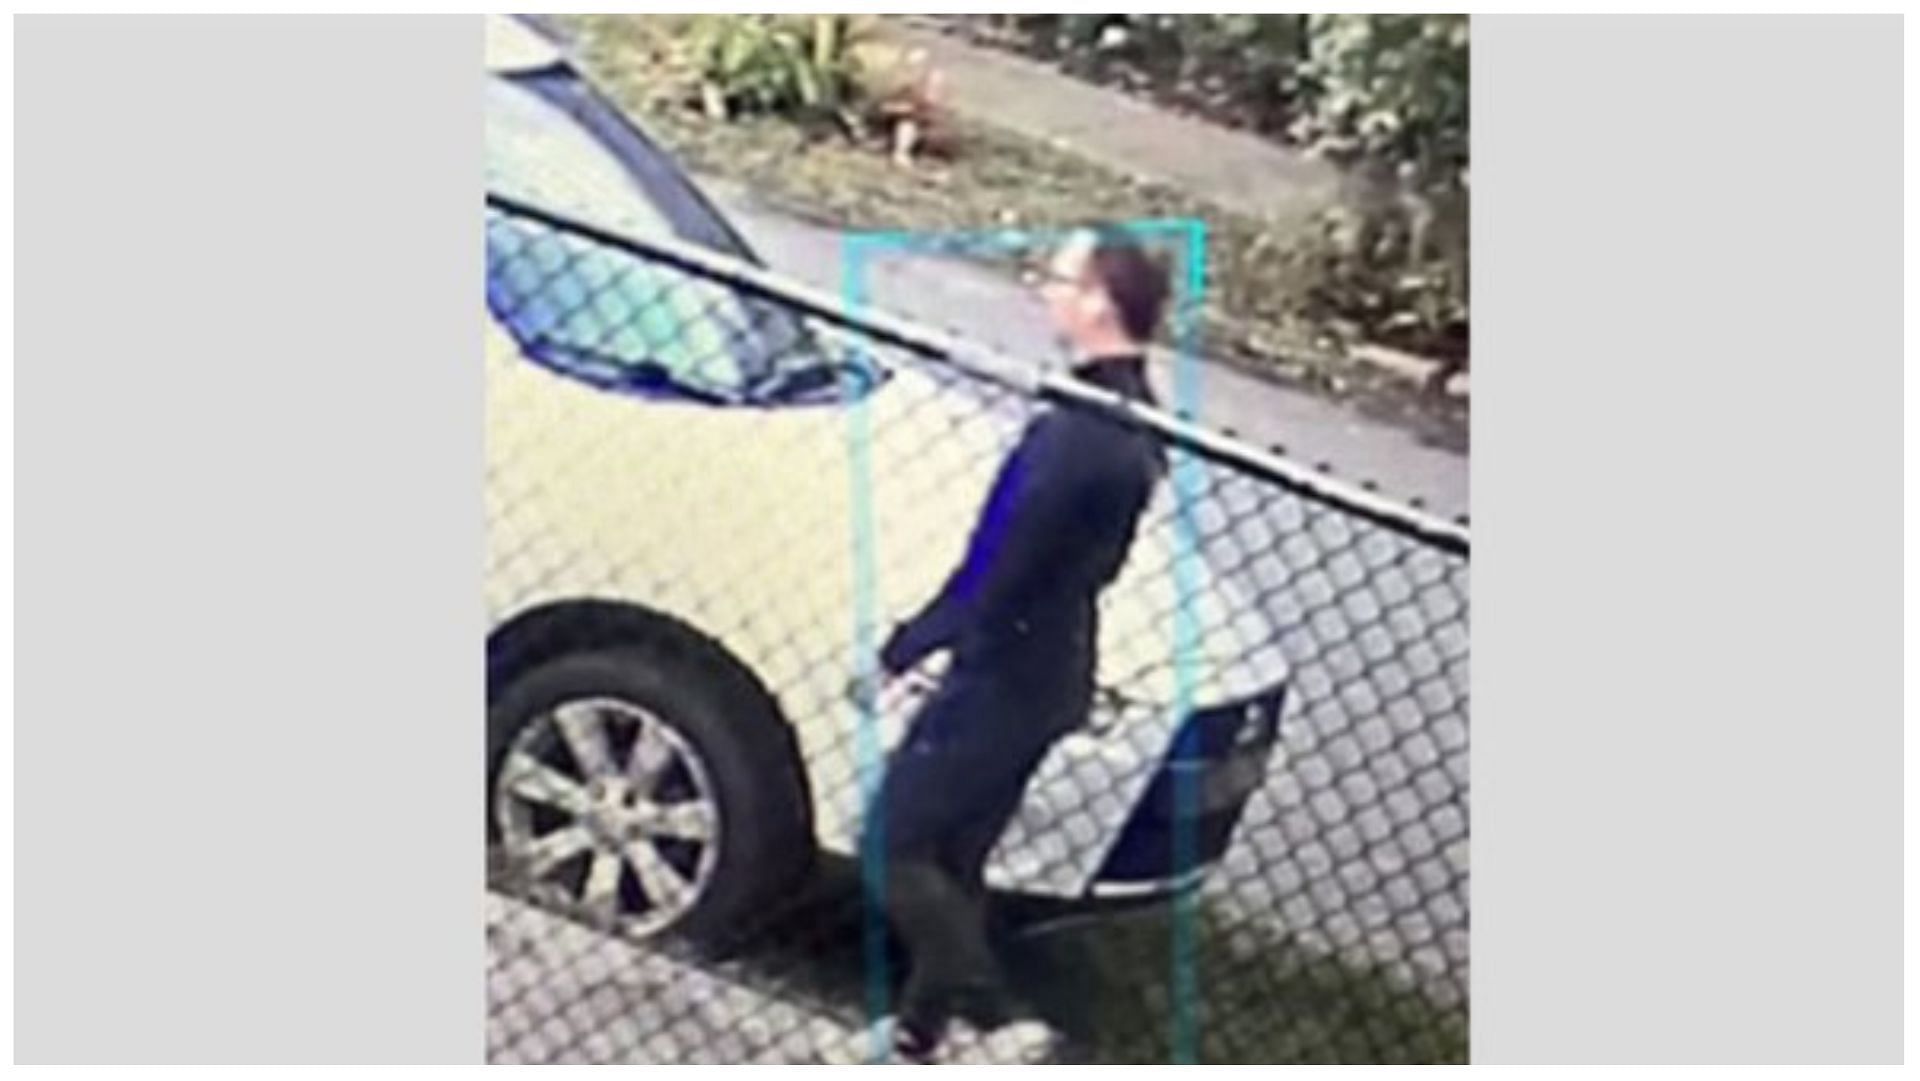 A suspect is in search for allegedly trying to kidnap a 10-year-old girl (Image via FORT LAUDERDALE POLICE DEPARTMENT)